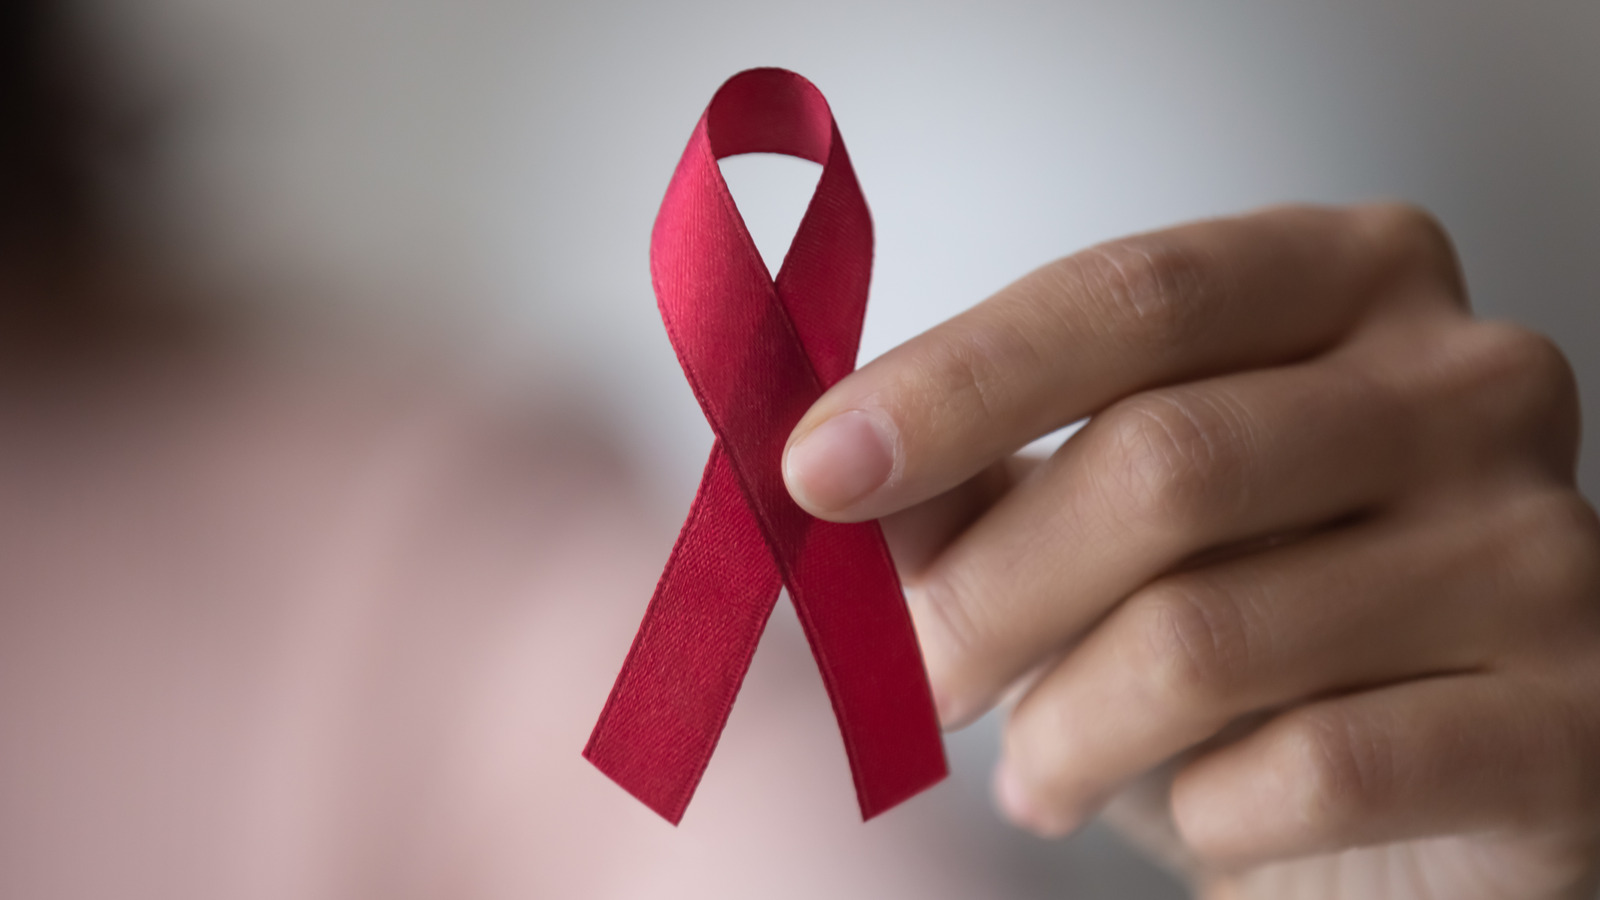 Myths You Should Stop Believing About HIV/AIDS